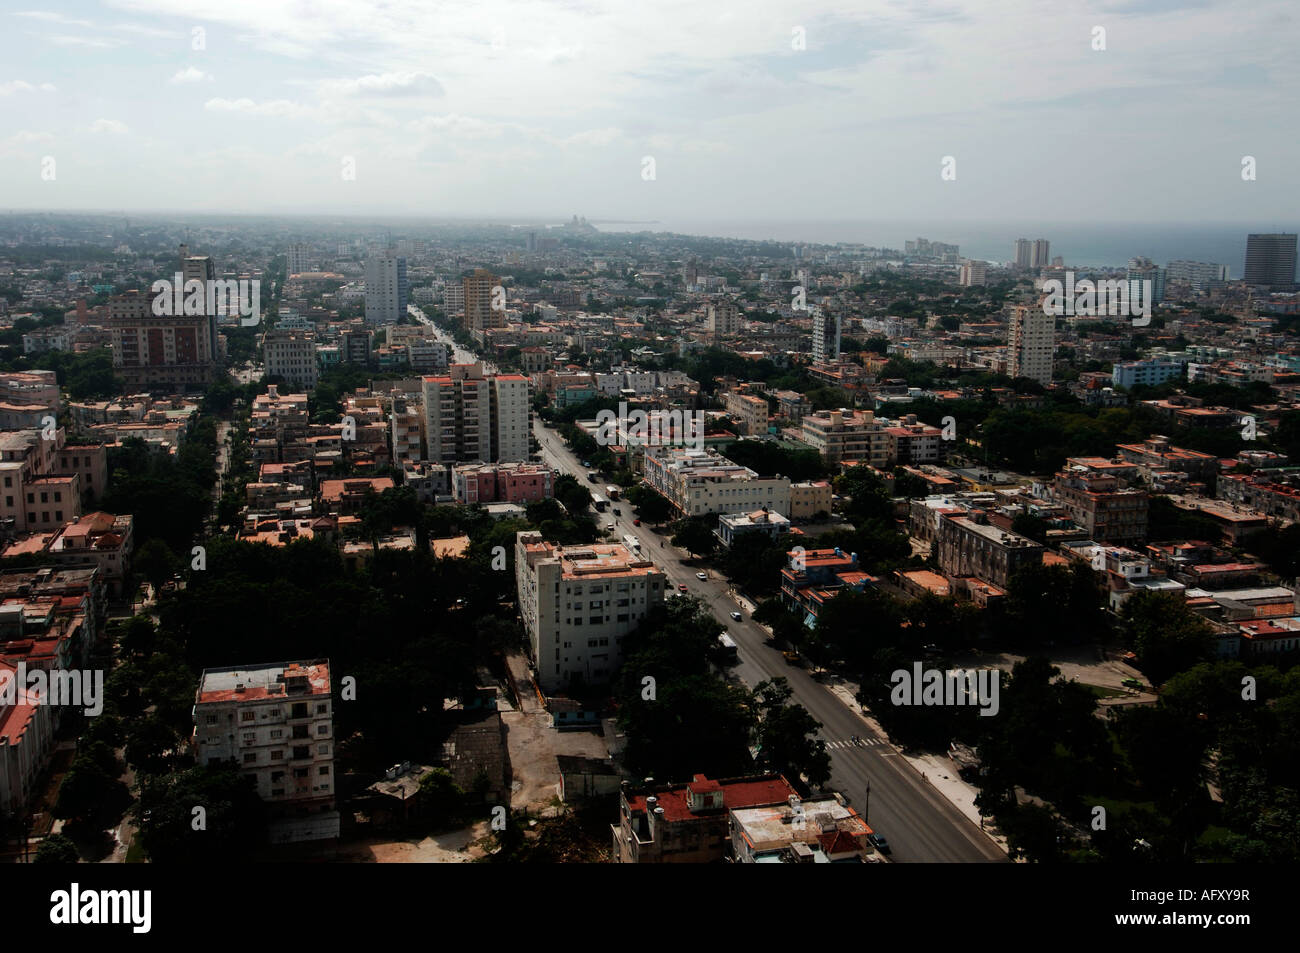 Cuba aerial view of Vedado from the hotel Tryp Habana Libre Stock Photo